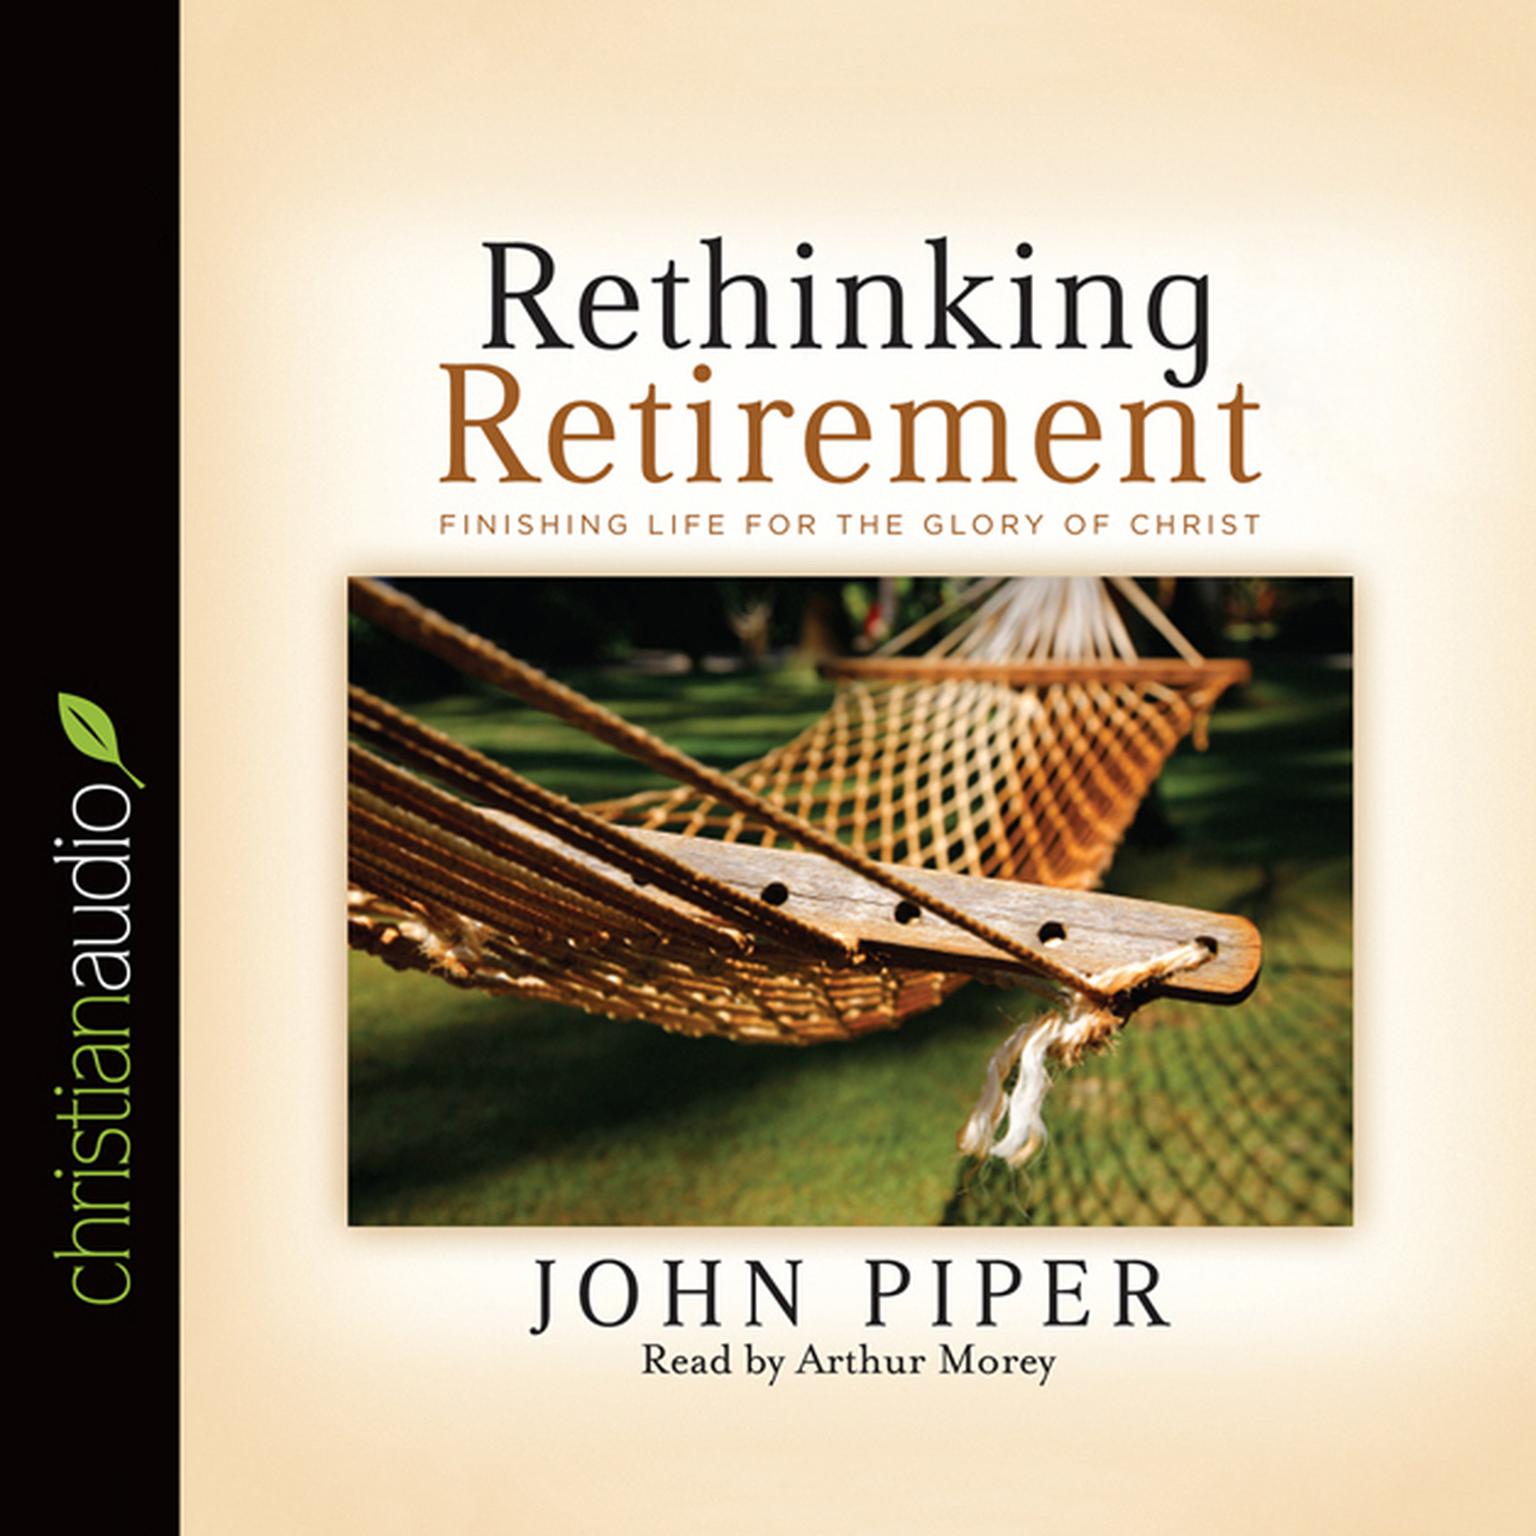 Rethinking Retirement: Finishing Life for the Glory of Christ Audiobook, by John Piper